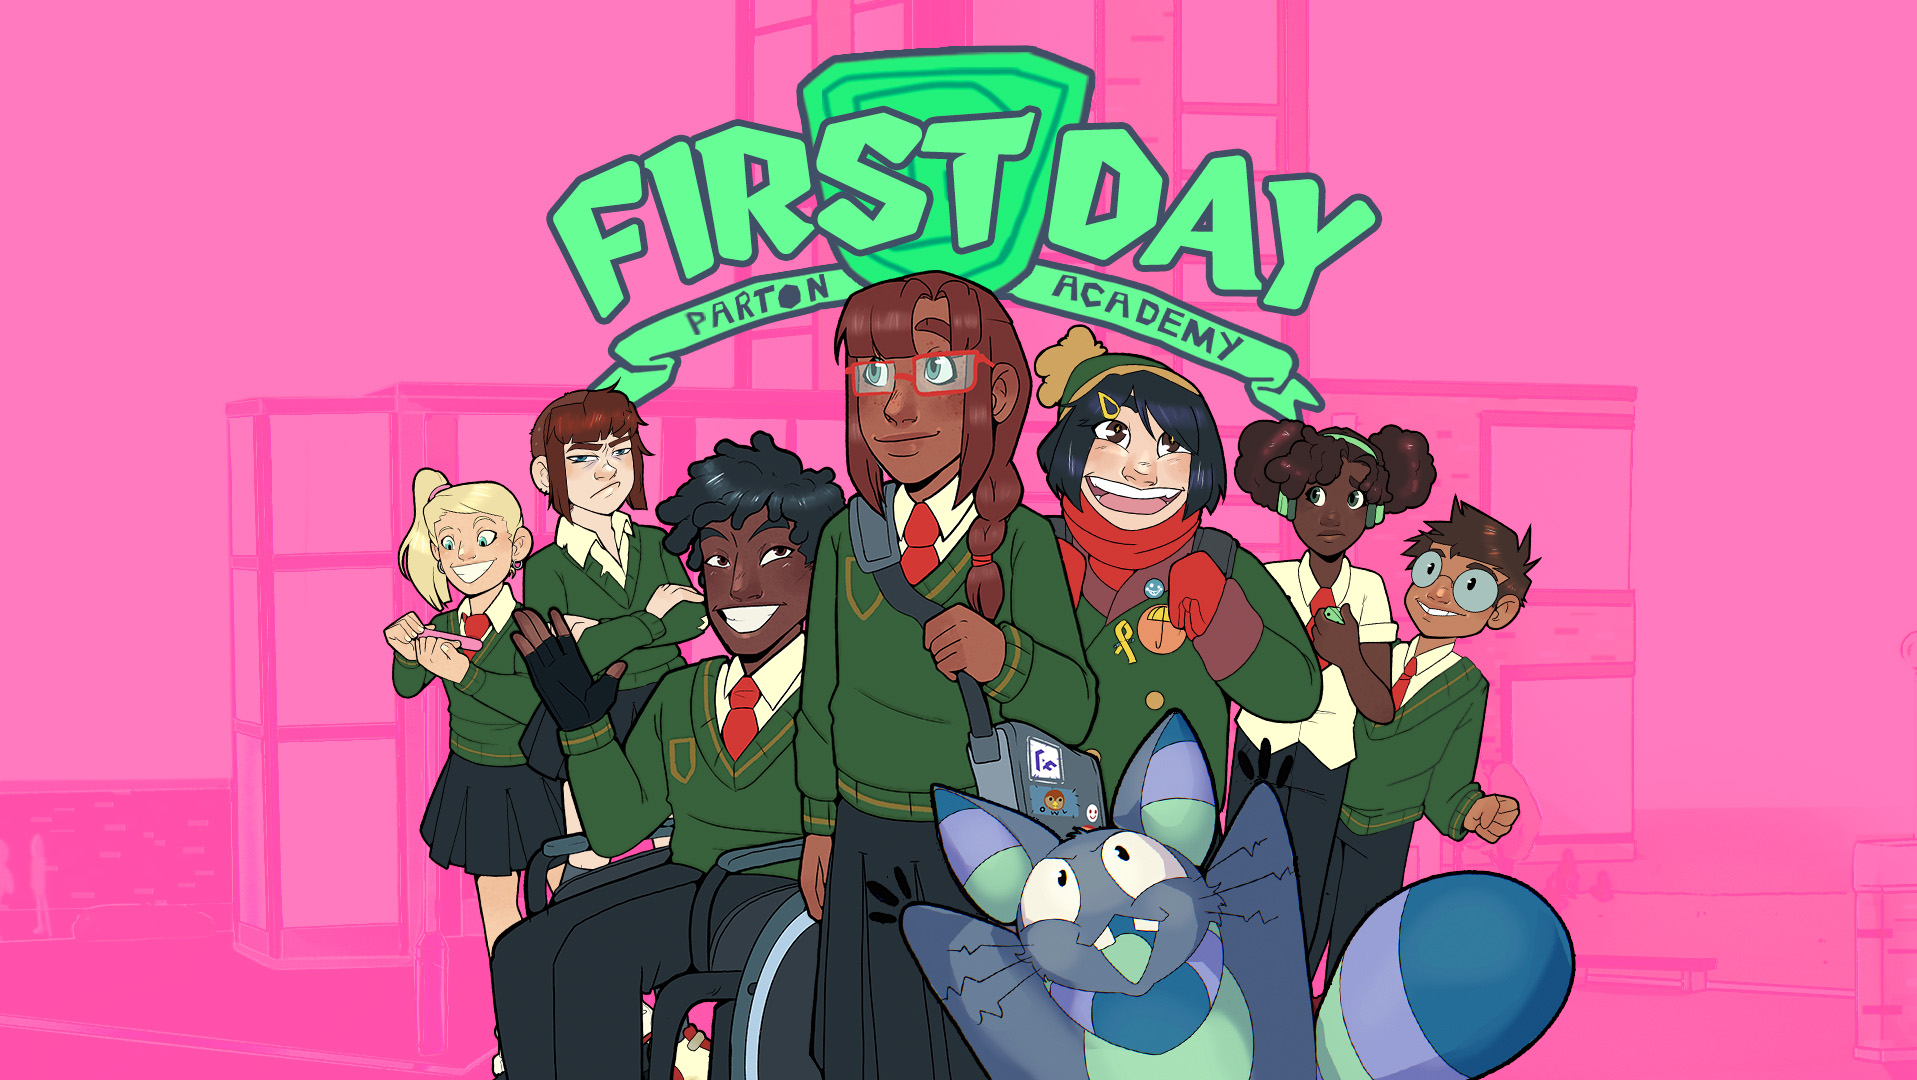 Promotional material for First Day: the image shows seven young people in green school uniforms, in front of a large school building in pink. A blue monster leaps up in the front of the image.